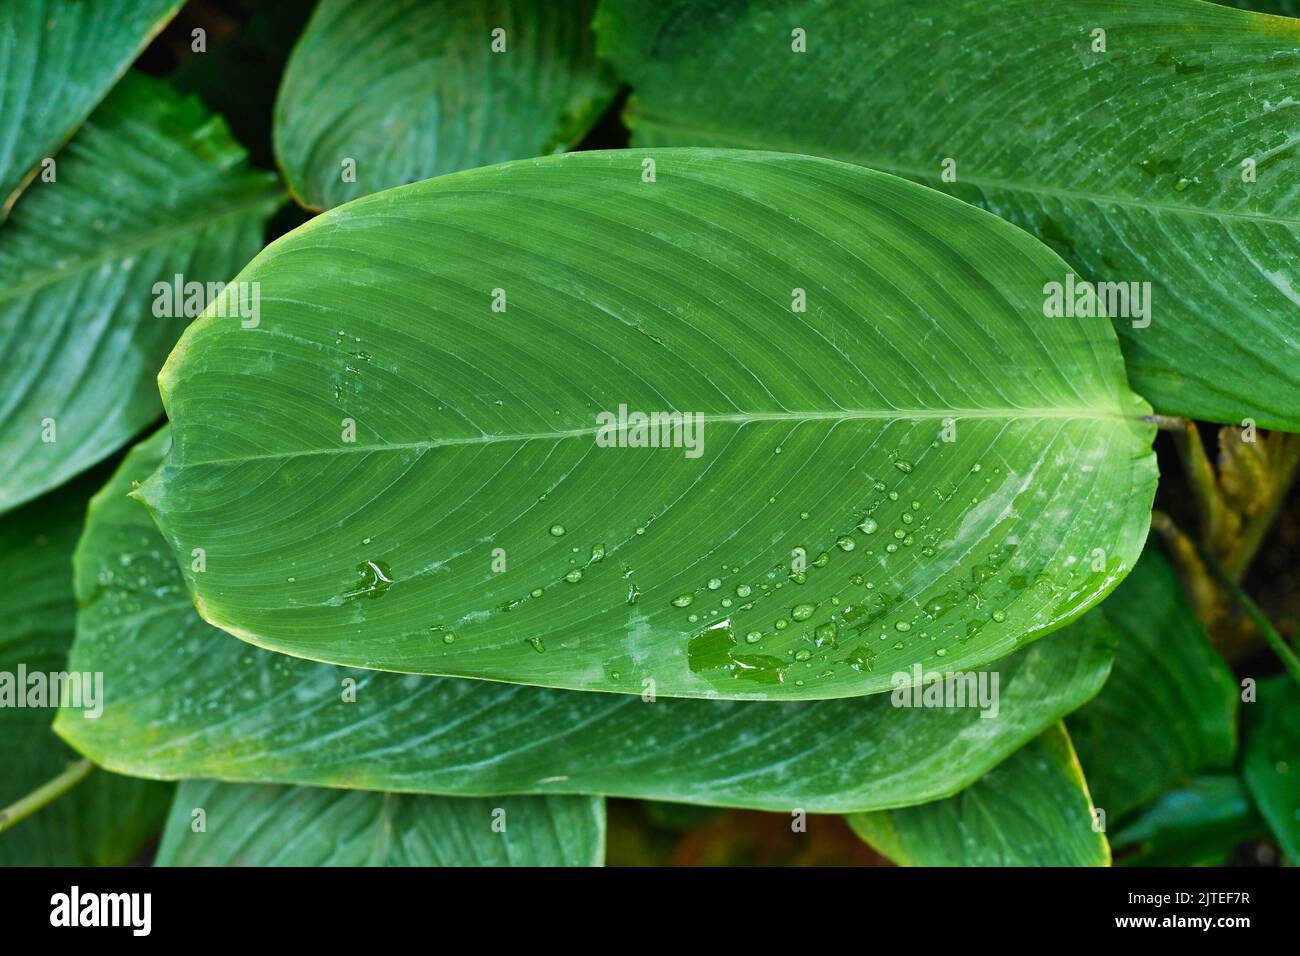 Green leaf of tropical 'Ctenanthe Compressa' houseplant Stock Photo